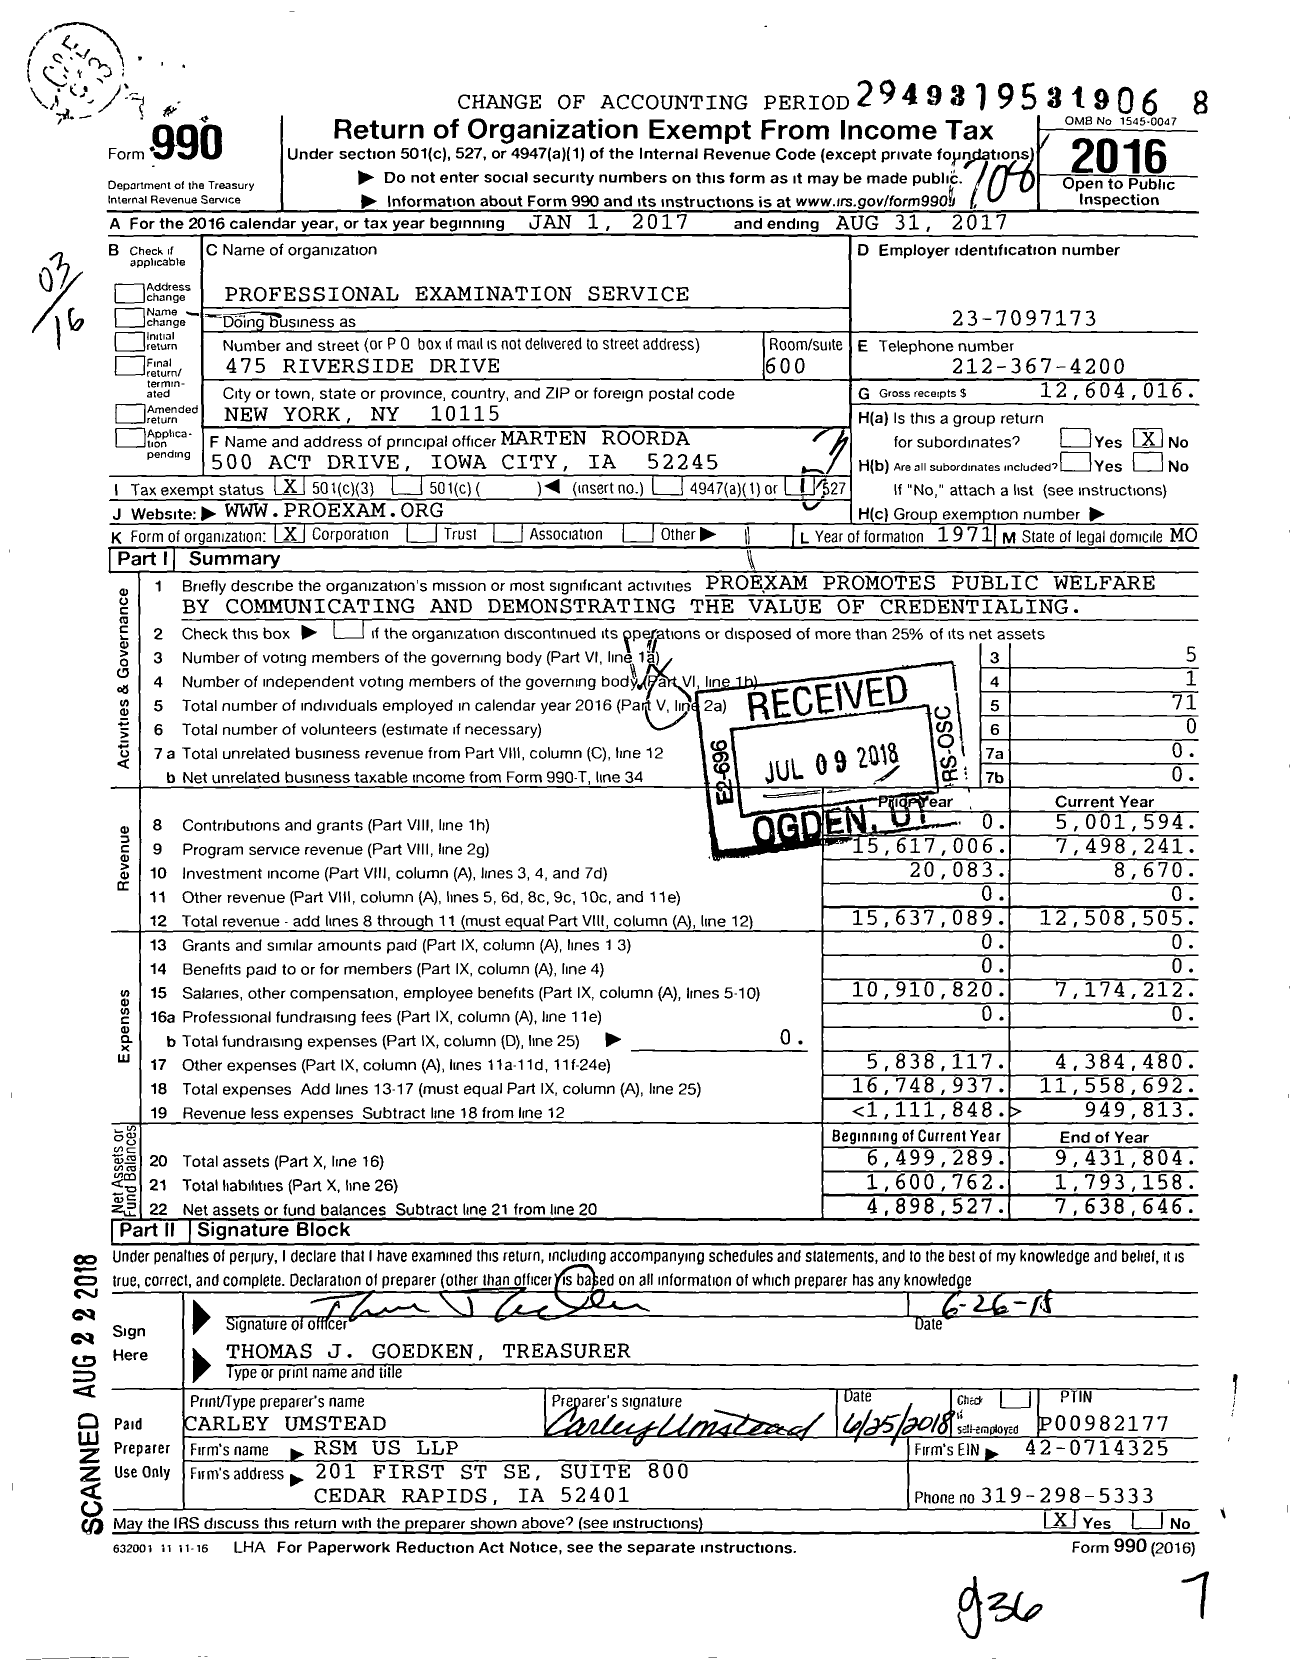 Image of first page of 2016 Form 990 for Professional Examination Services